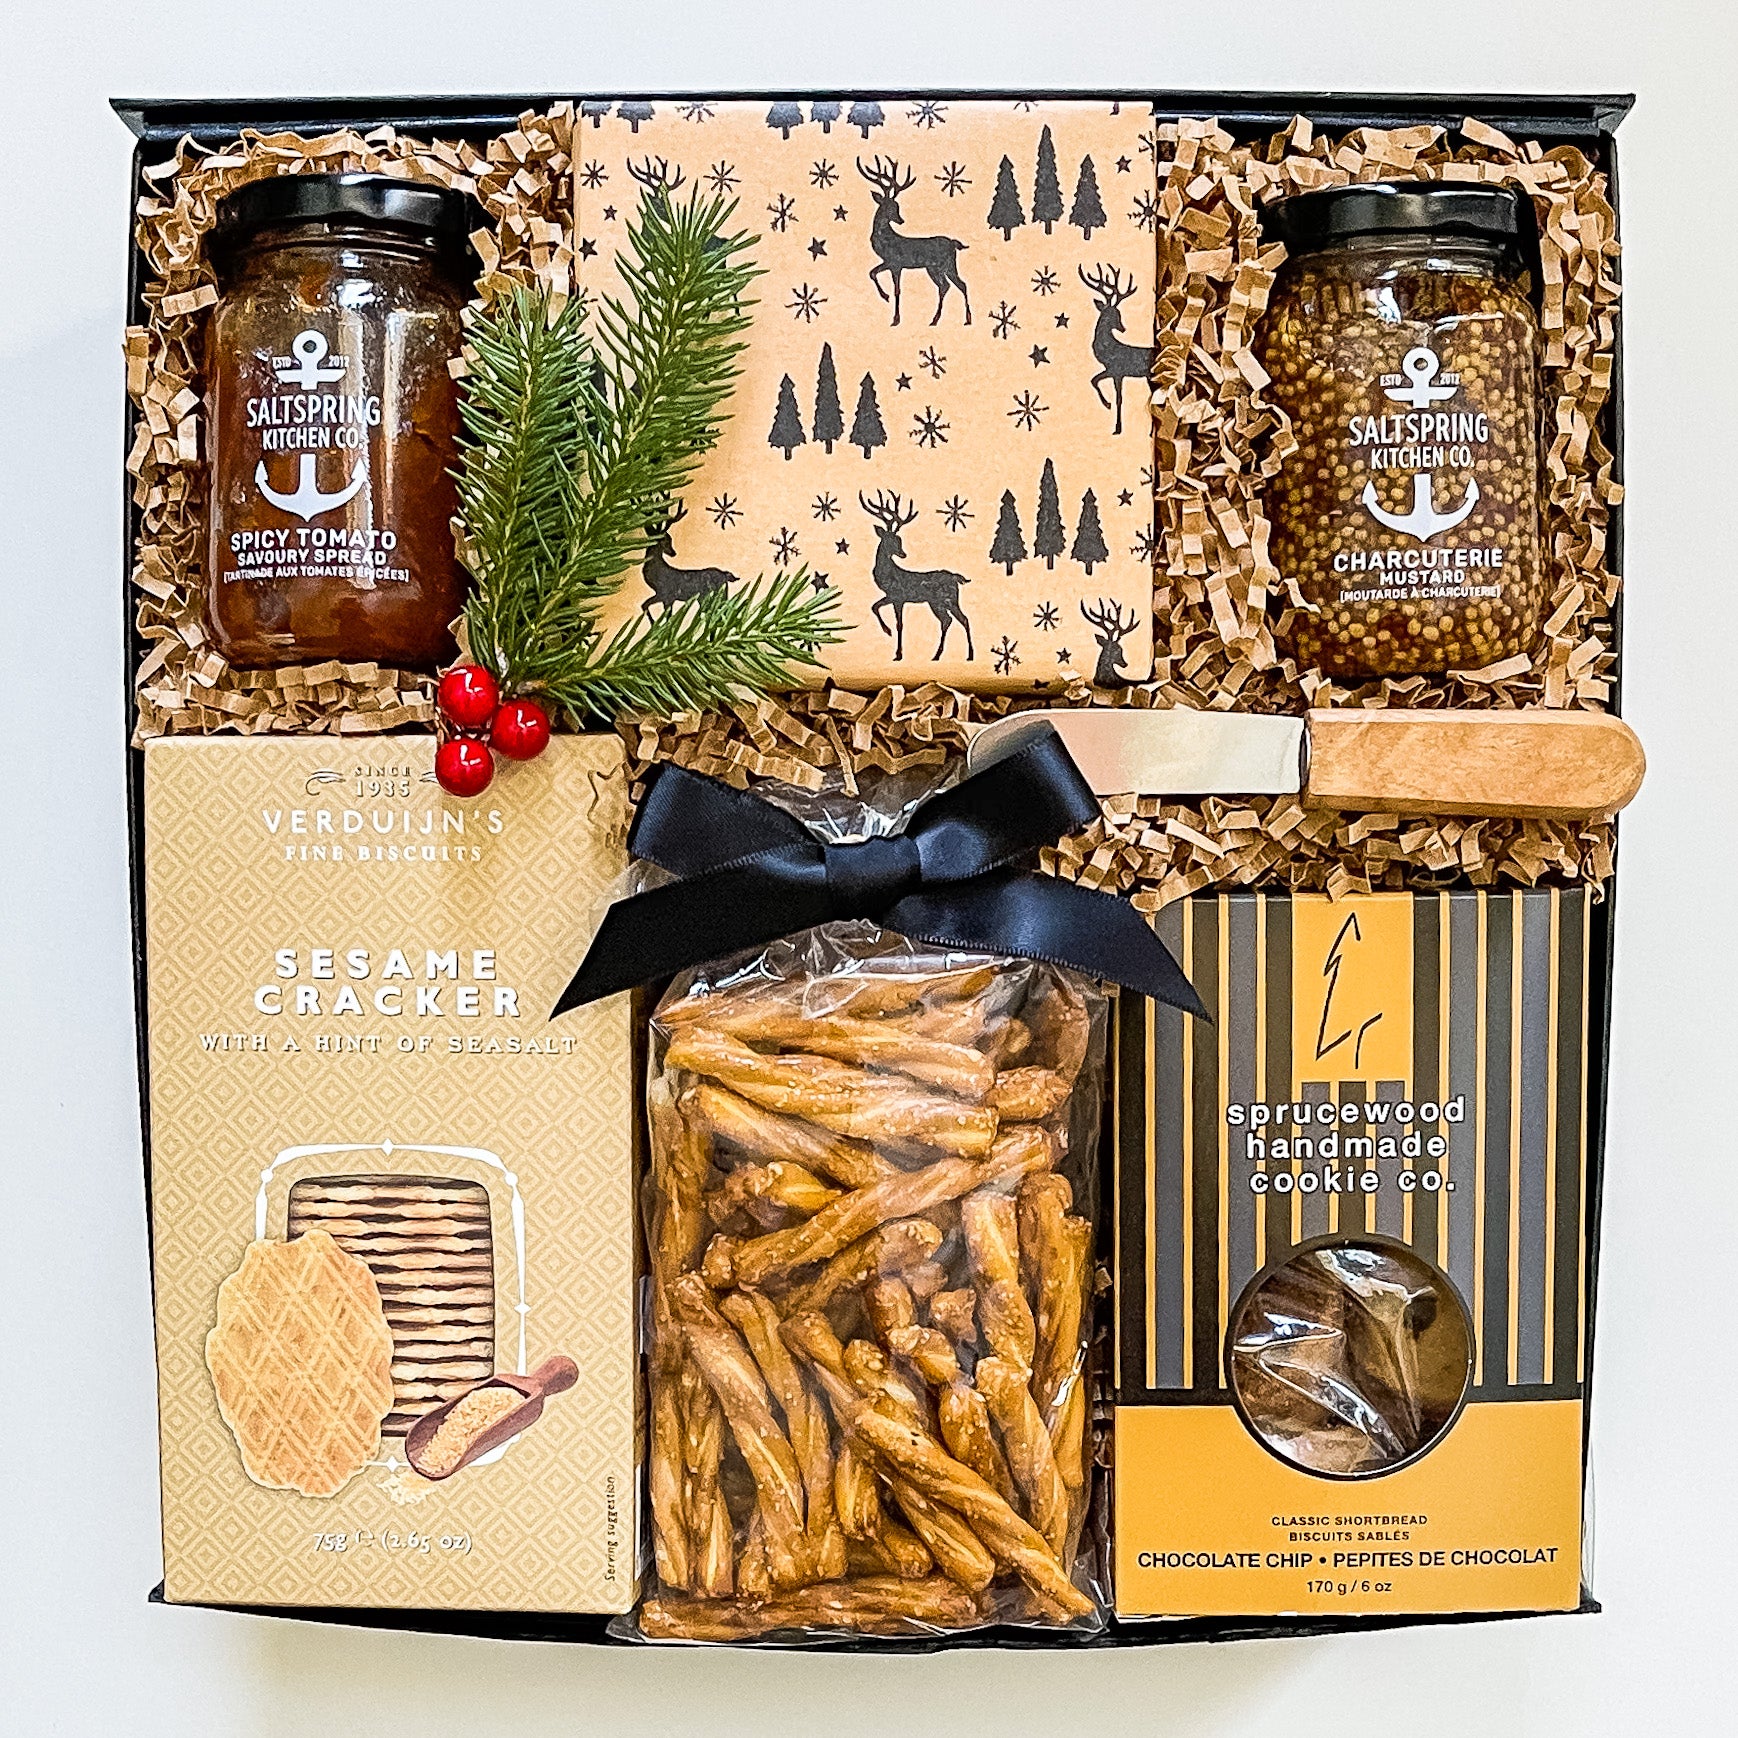 Christmas gifts for boss, Christmas gifts for friends, holiday gifts for him, holiday gifts for wife, holiday gifts for husband, Christmas gifts for wife, Christmas gifts for husband, Christmas gift baskets, Christmas gift boxes, holiday gift baskets, holiday gift boxes, thoughtful Christmas gifts, Halifax Gift Delivery, Dartmouth Gift Delivery, Bedford Gift Delivery, Halifax Gifts, Halifax Gift Boxes, Gift Boxes, Canadian Gift Boxes, Canadian Gift Baskets, Holiday food gifts, charcuterie gift